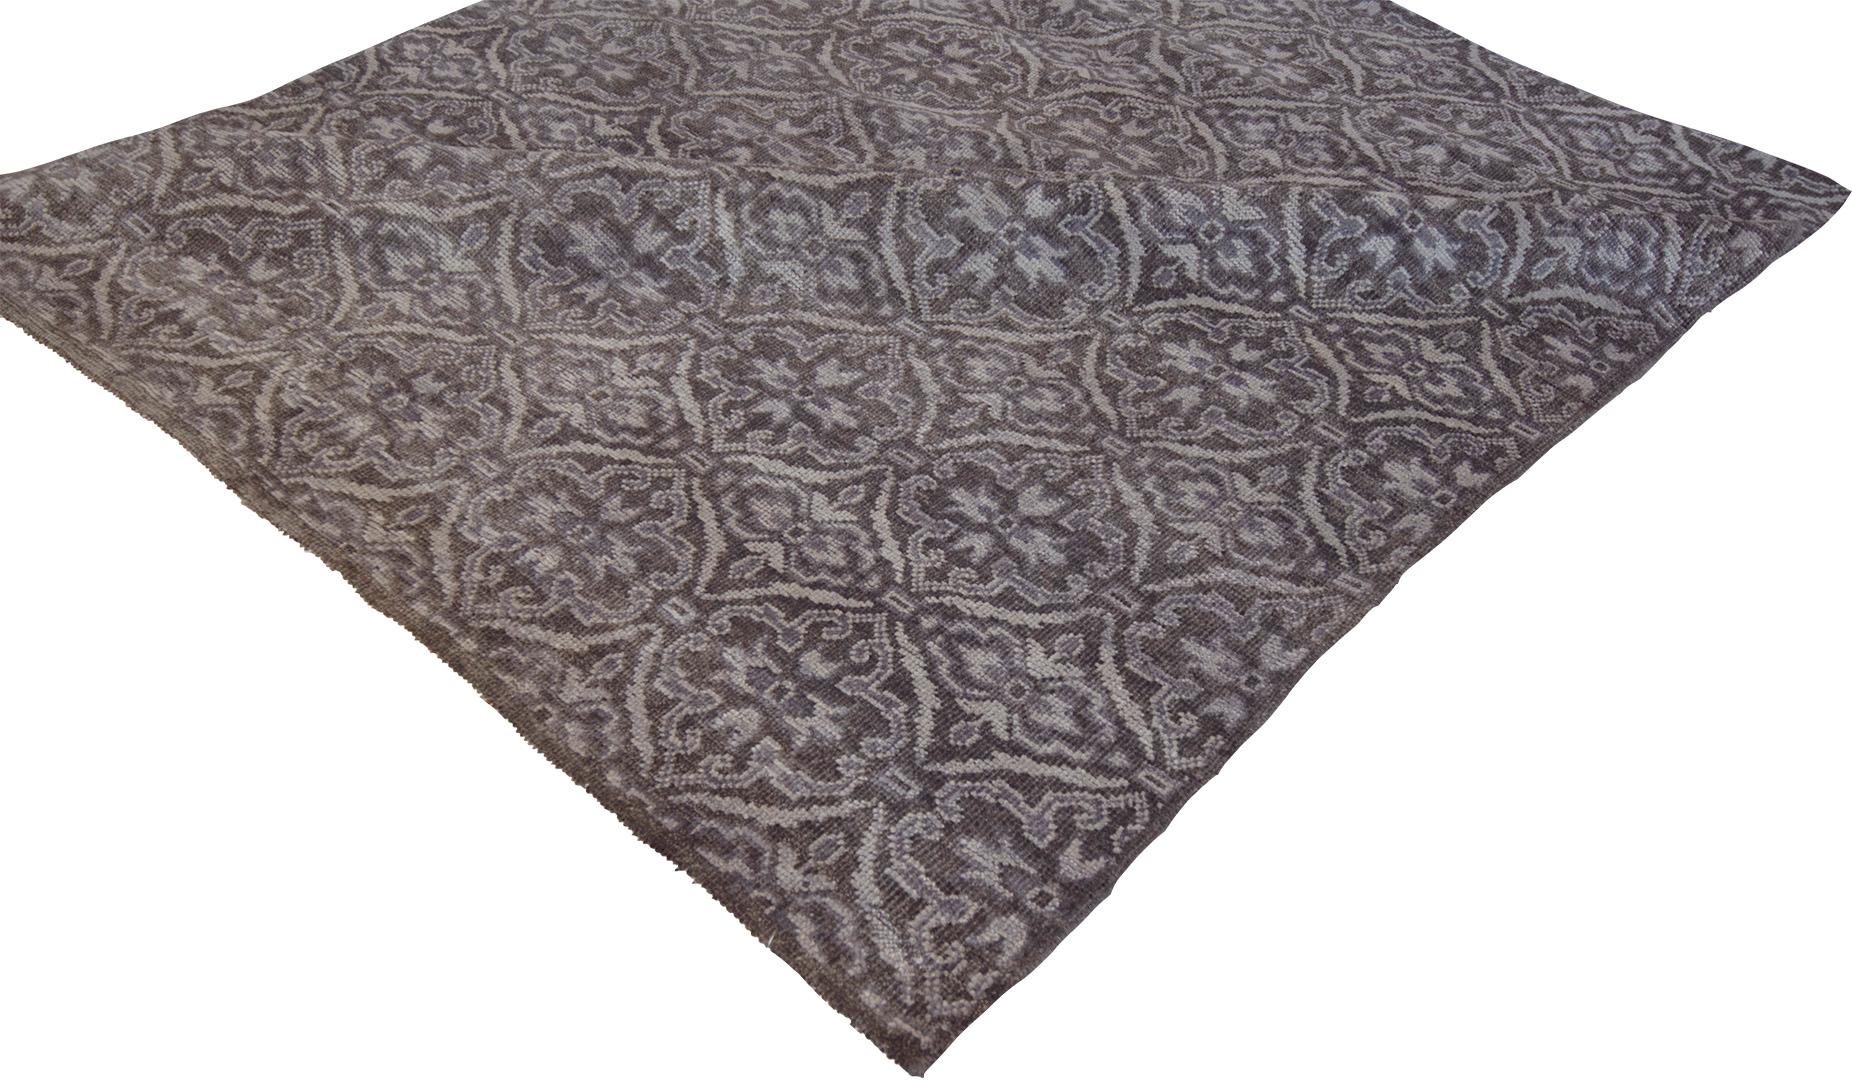 Handwoven in Kashmir, this beautiful modern rug features a soothing dark gray color field and a decorative design. 100% natural wool pile. Brand new.